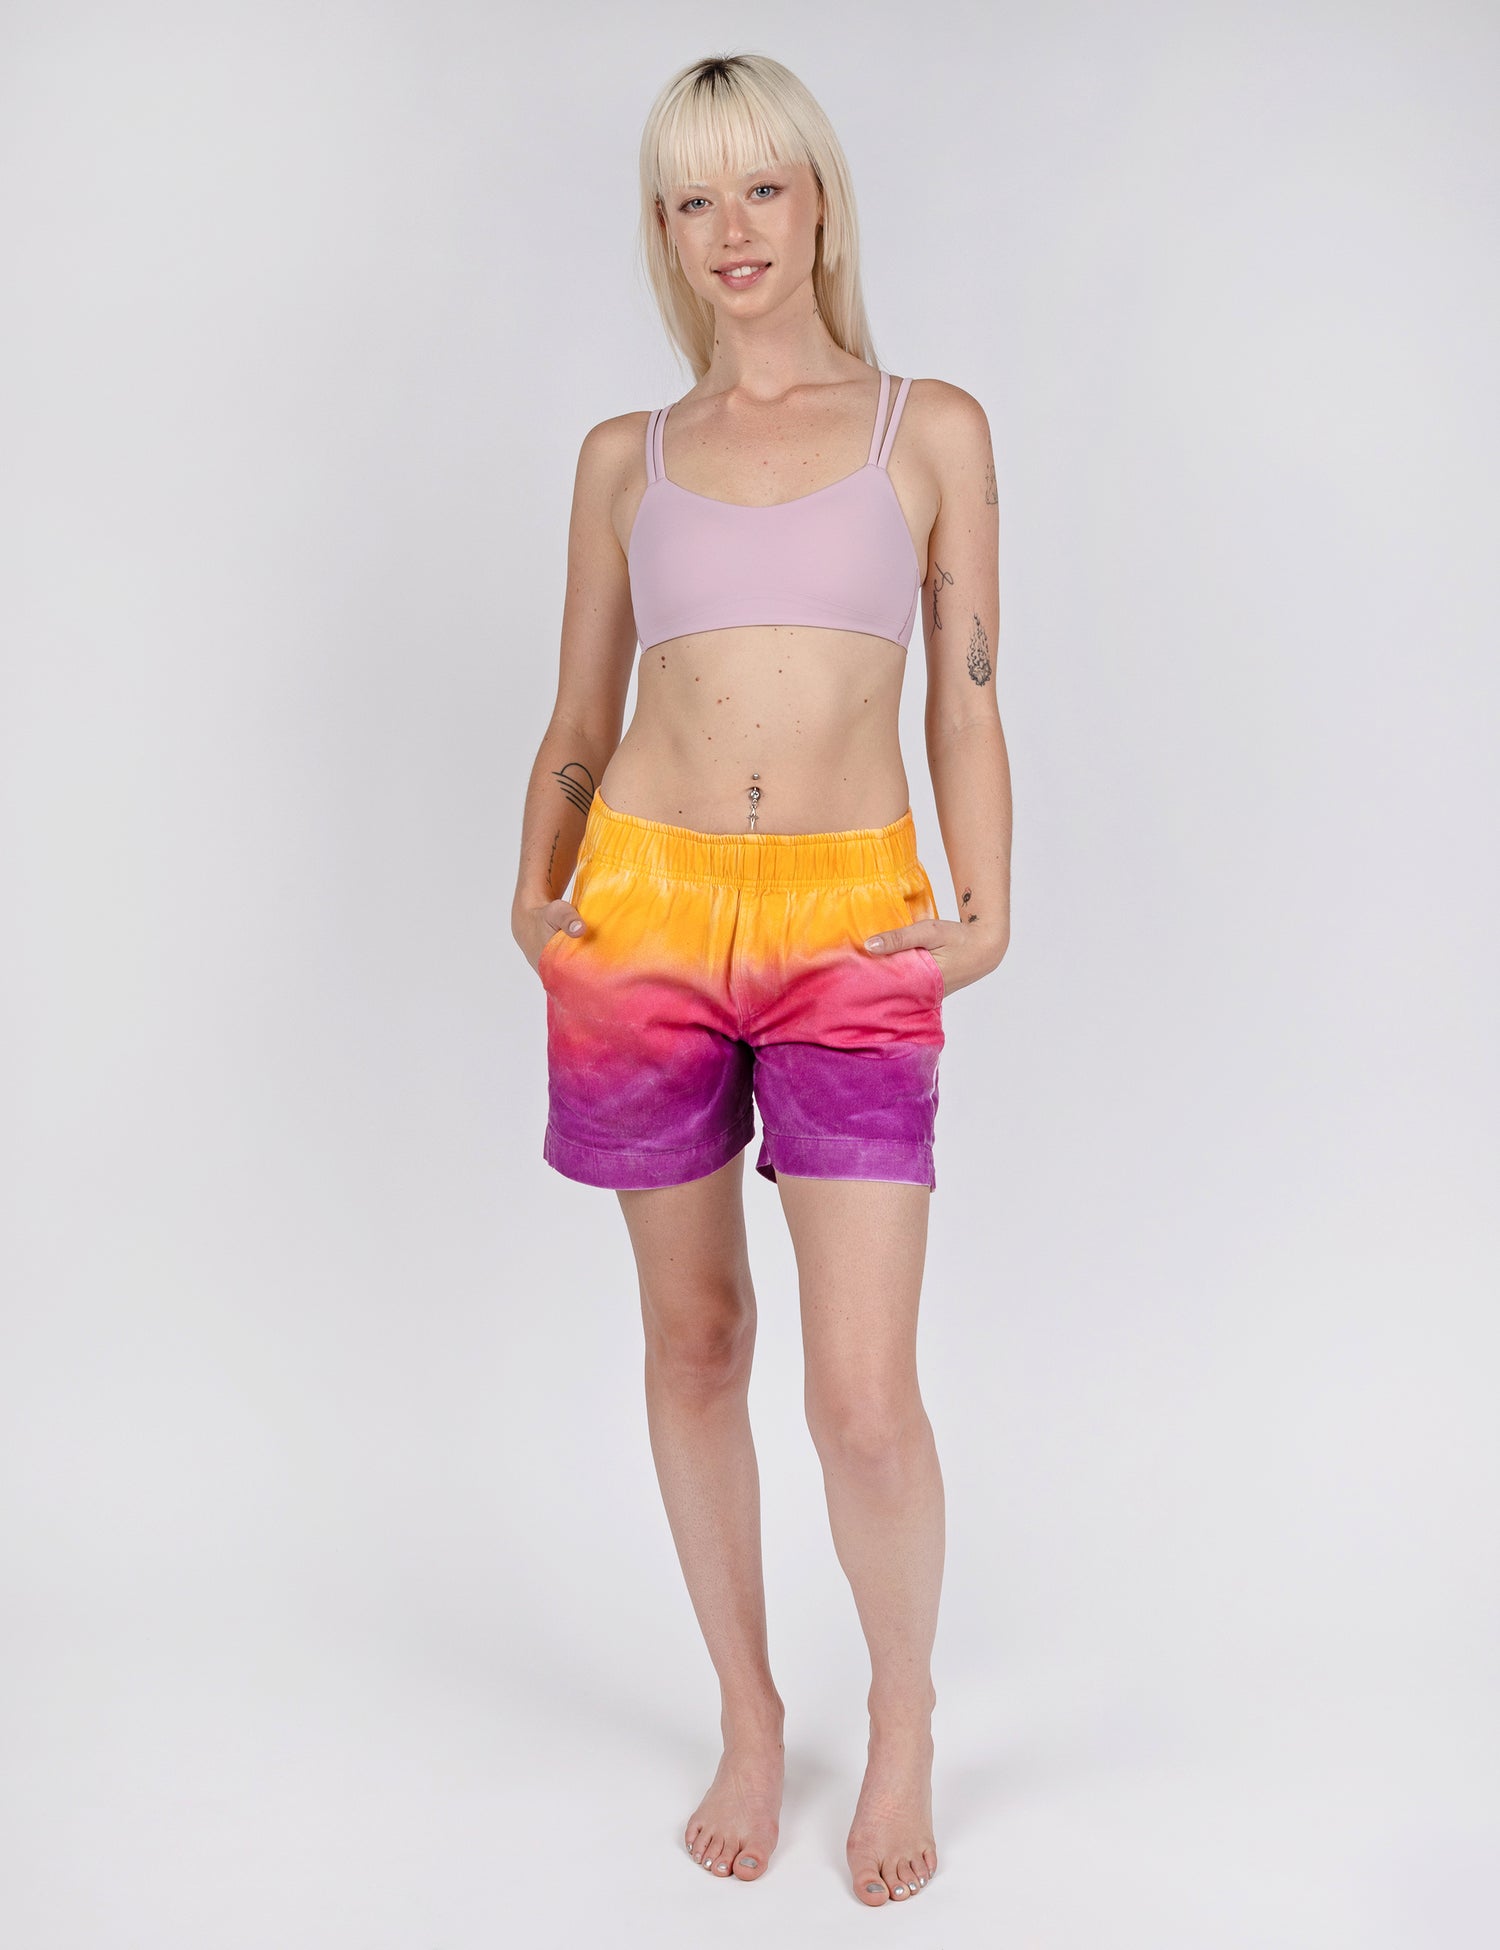 woman wearing relax fit shorts with gradient design of yellow pink and purple.